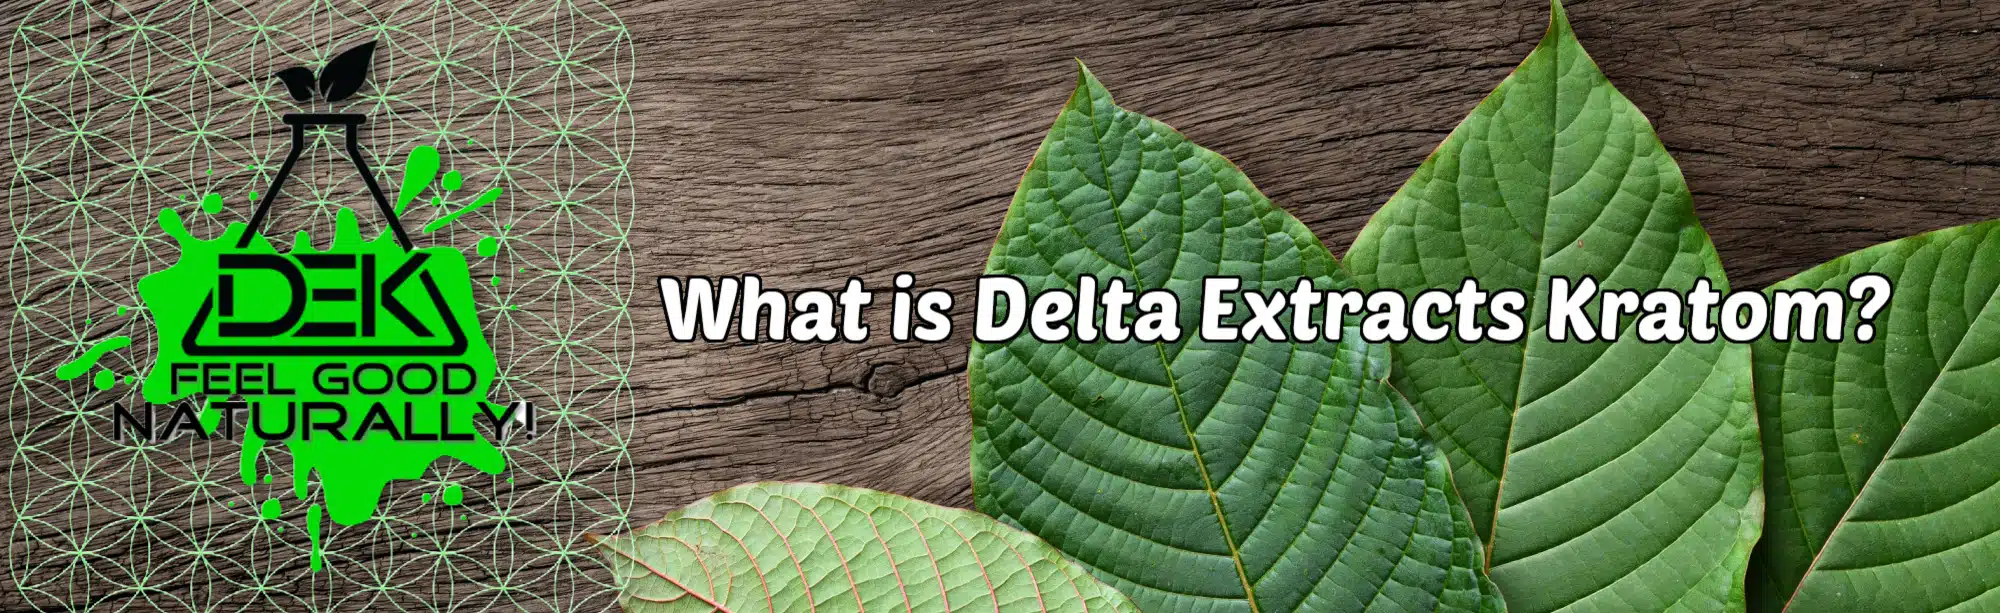 what is delta extracts kratom banner with company logo